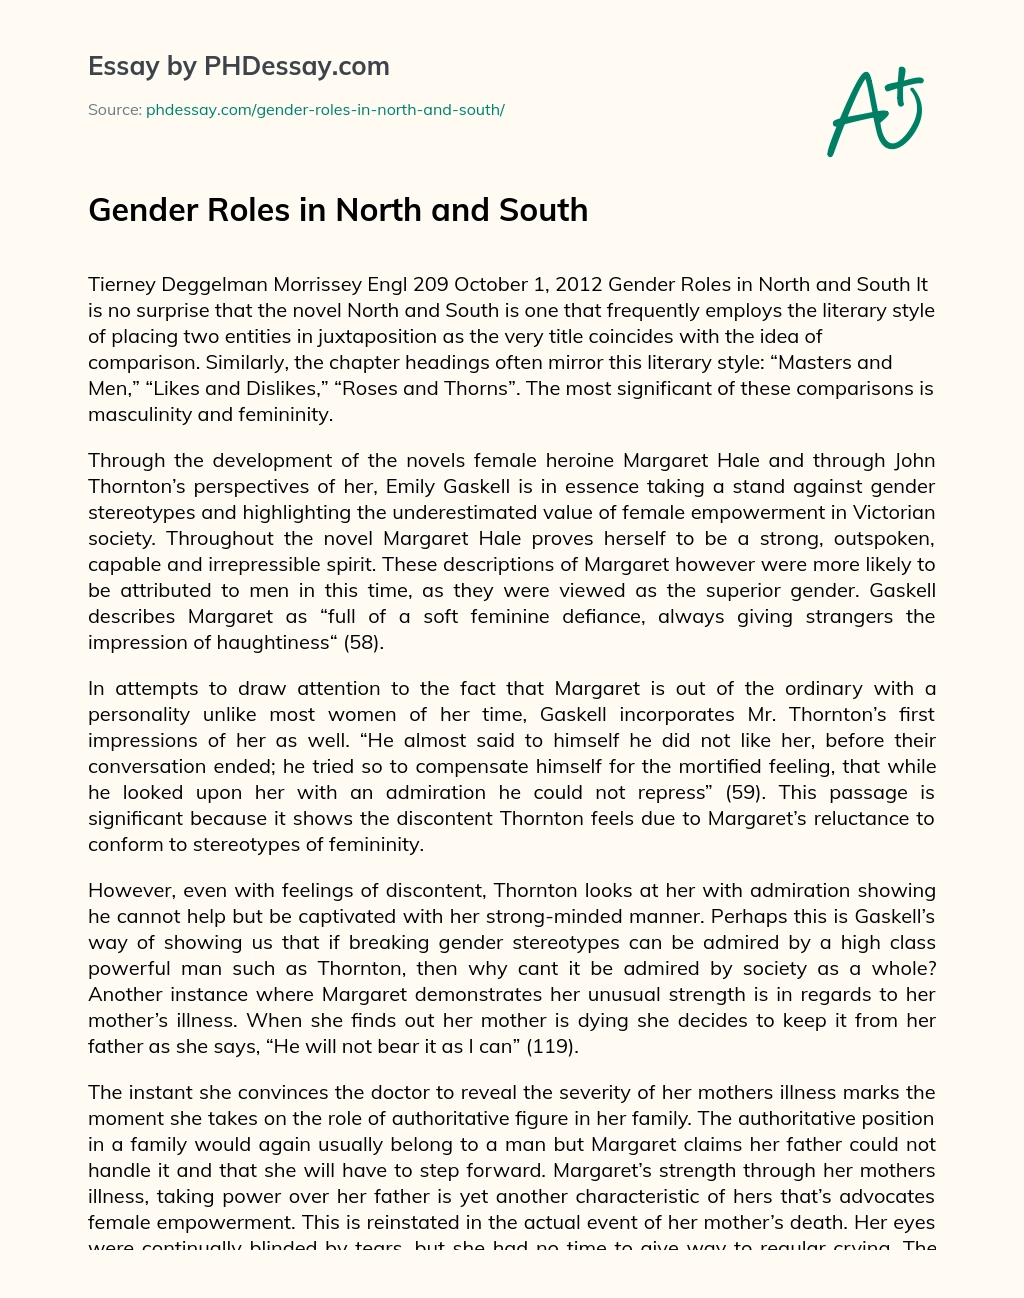 Gender Roles in North and South essay